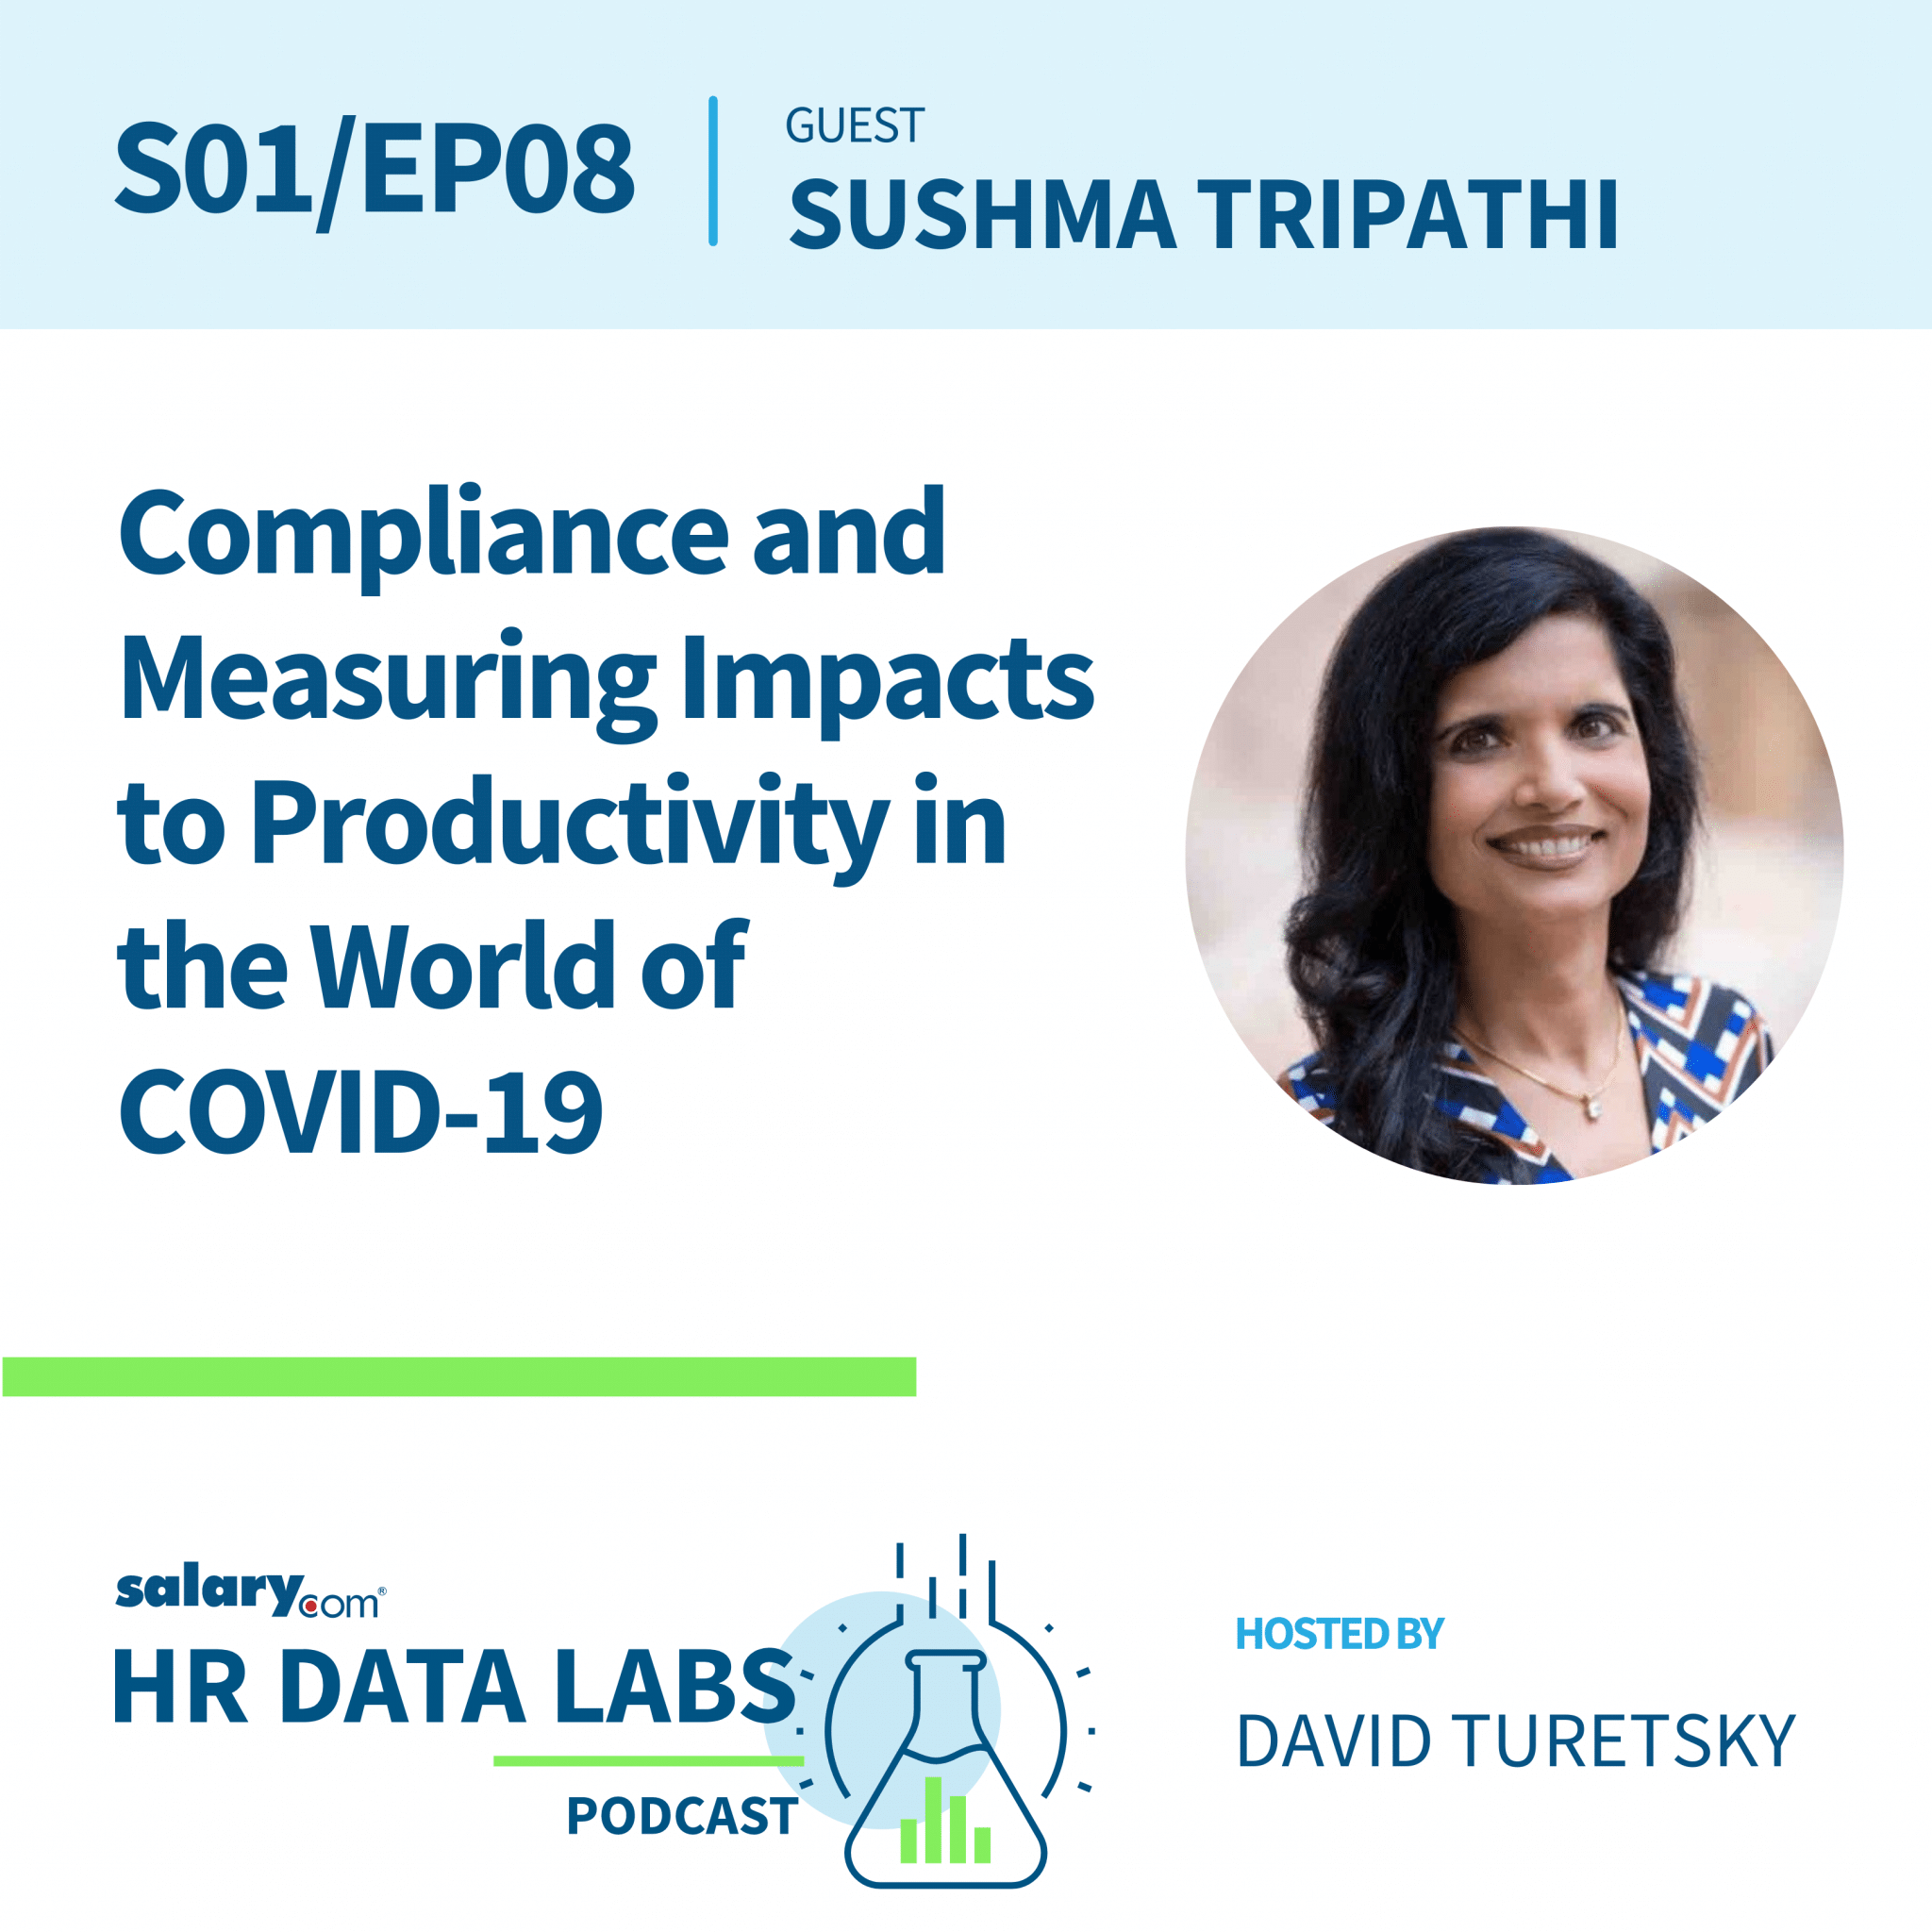 Compliance and Measuring Impacts to Productivity in the World of COVID-19